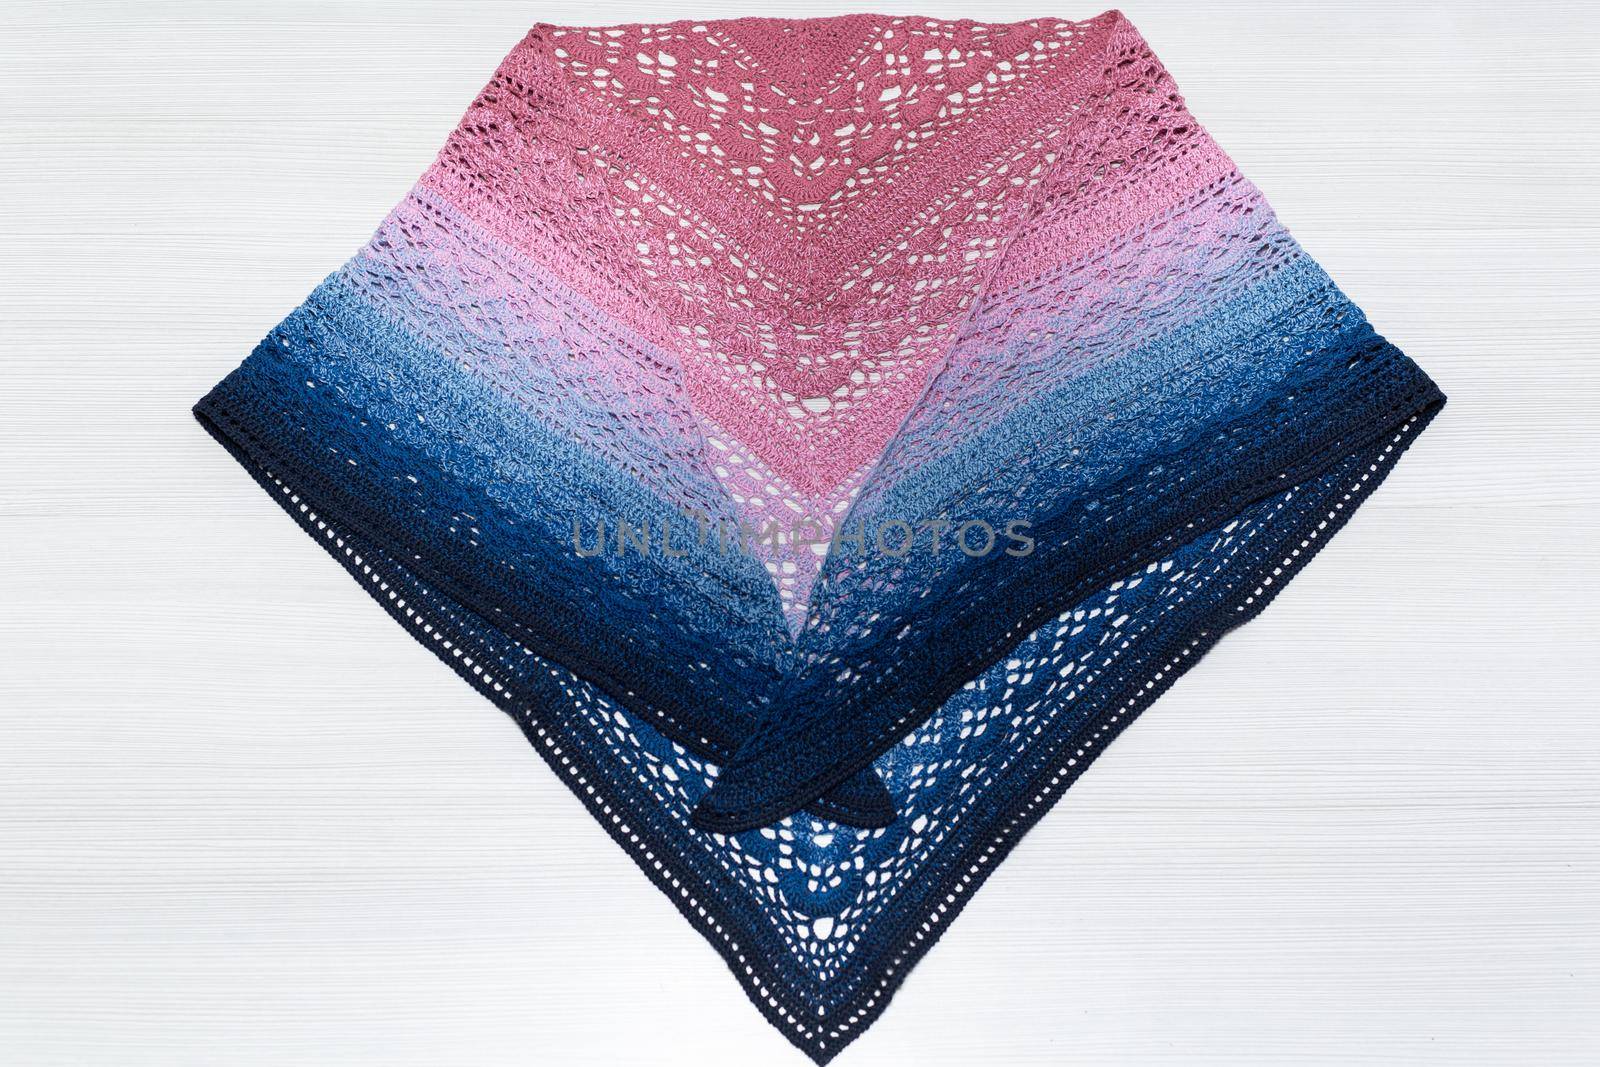 Knitted scarf pink and blue on a white background. by StudioPeace